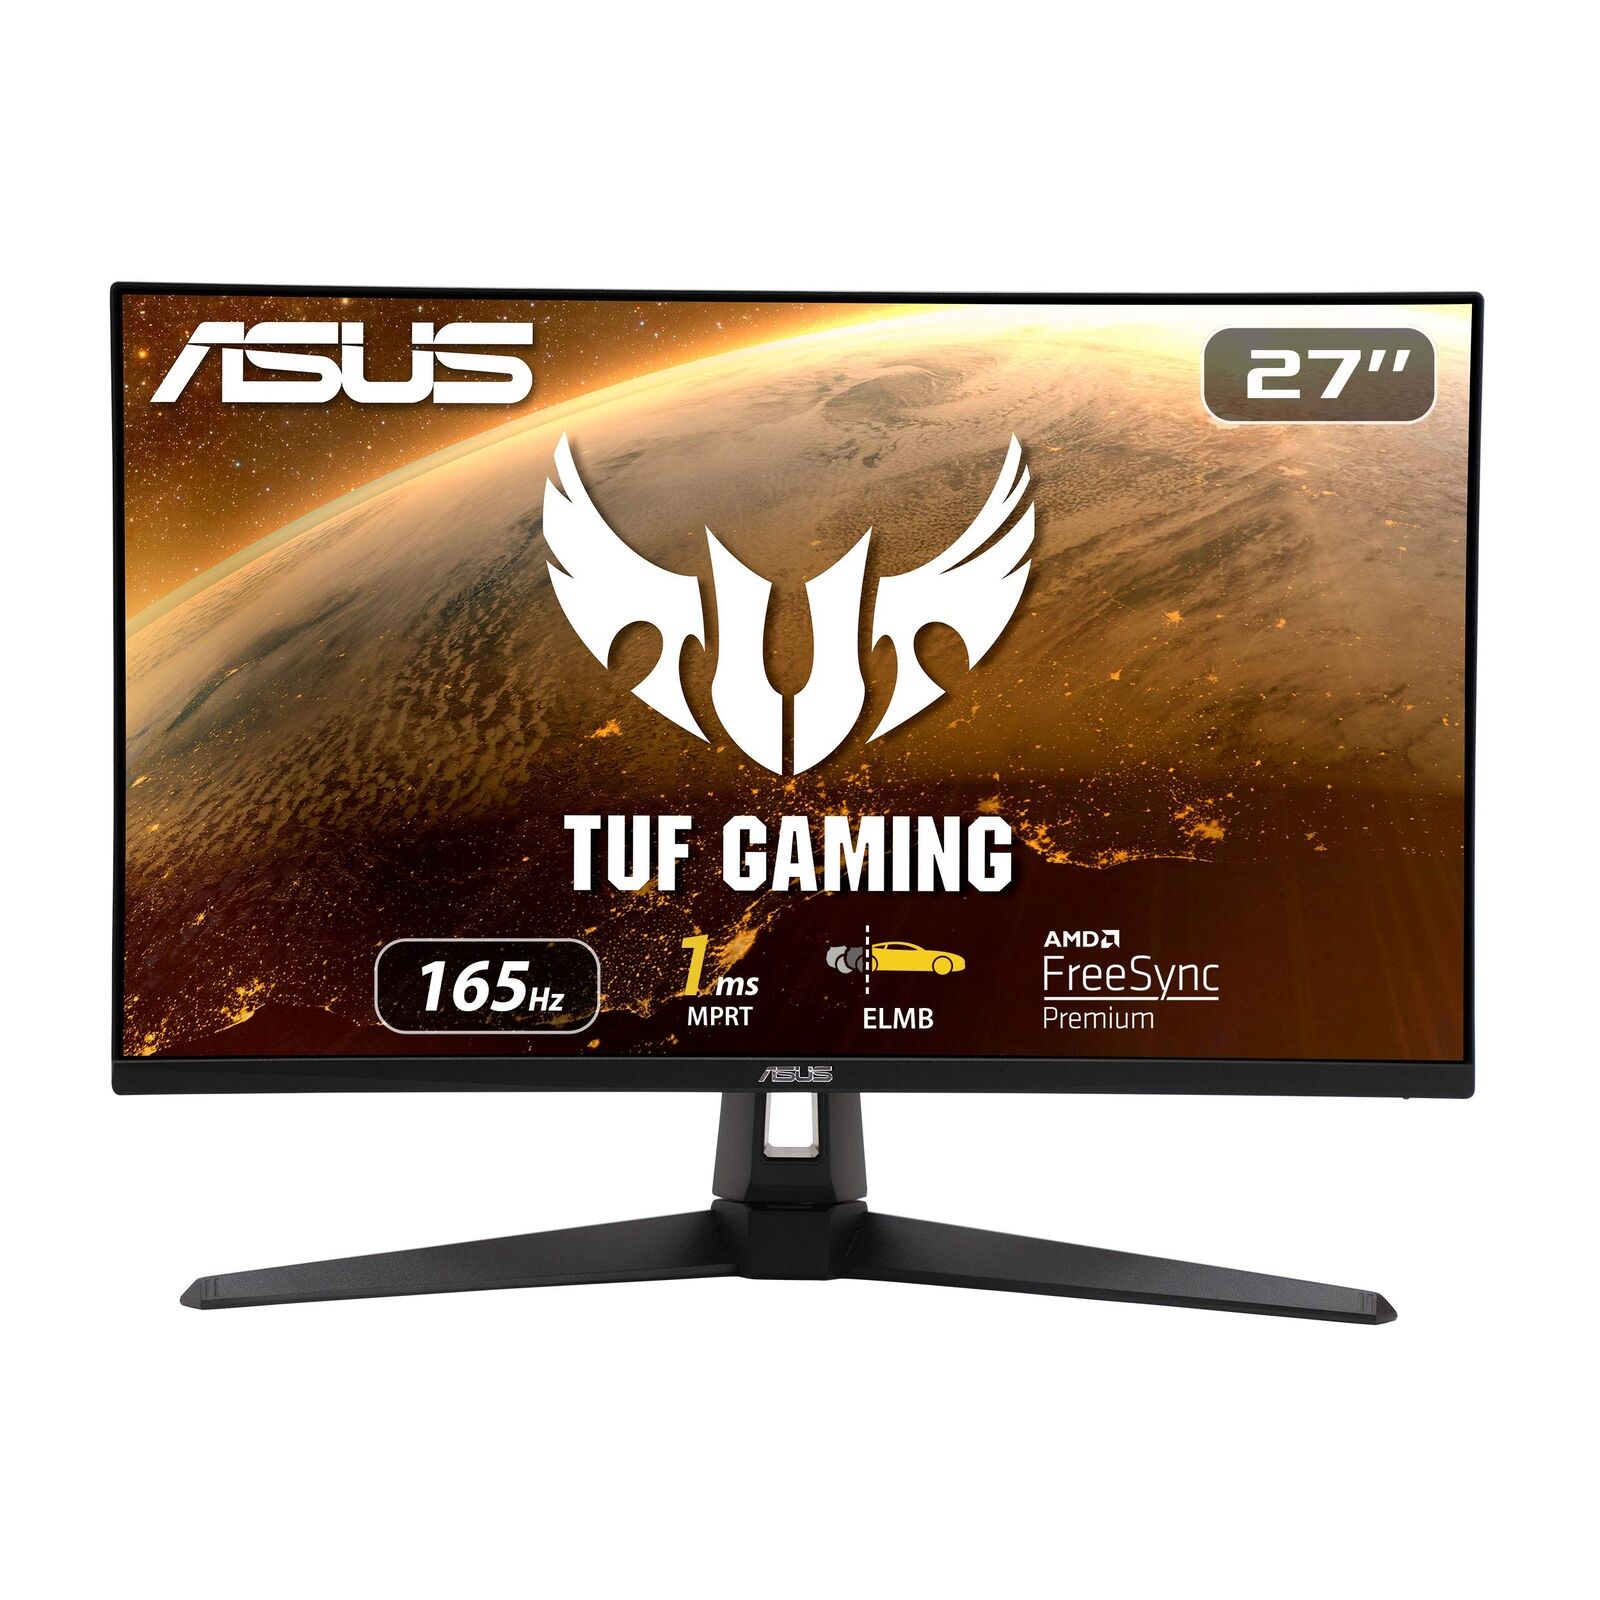 ASUS 27” Gaming Monitor  VG279Q1A, 1080P Full HD, 165Hz (Supports